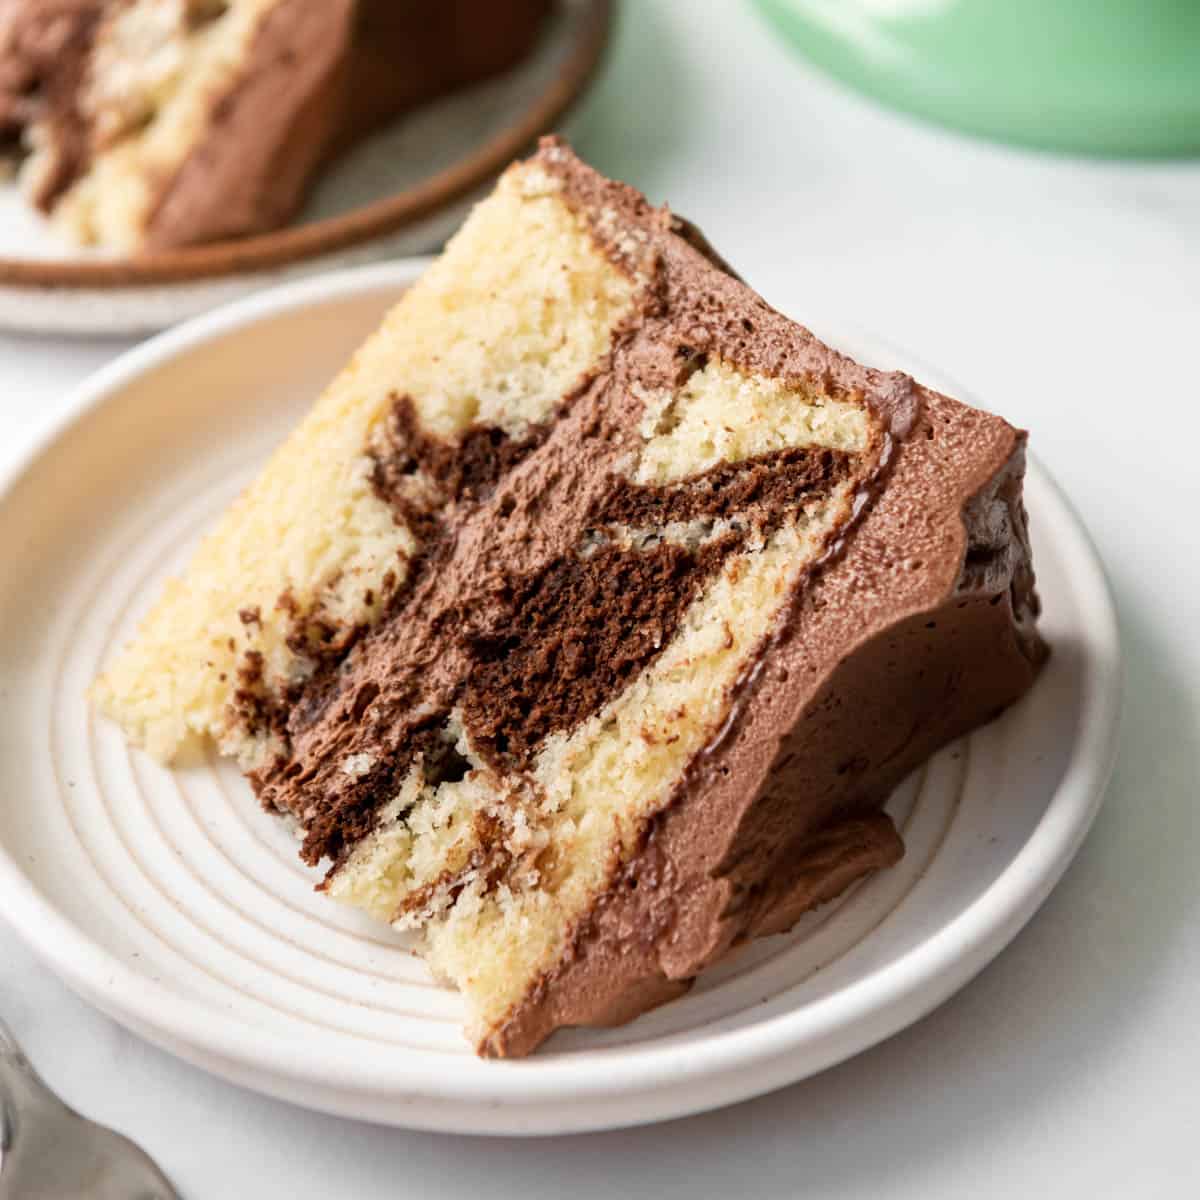 Best Marble Cake Recipe from Scratch - House of Nash Eats